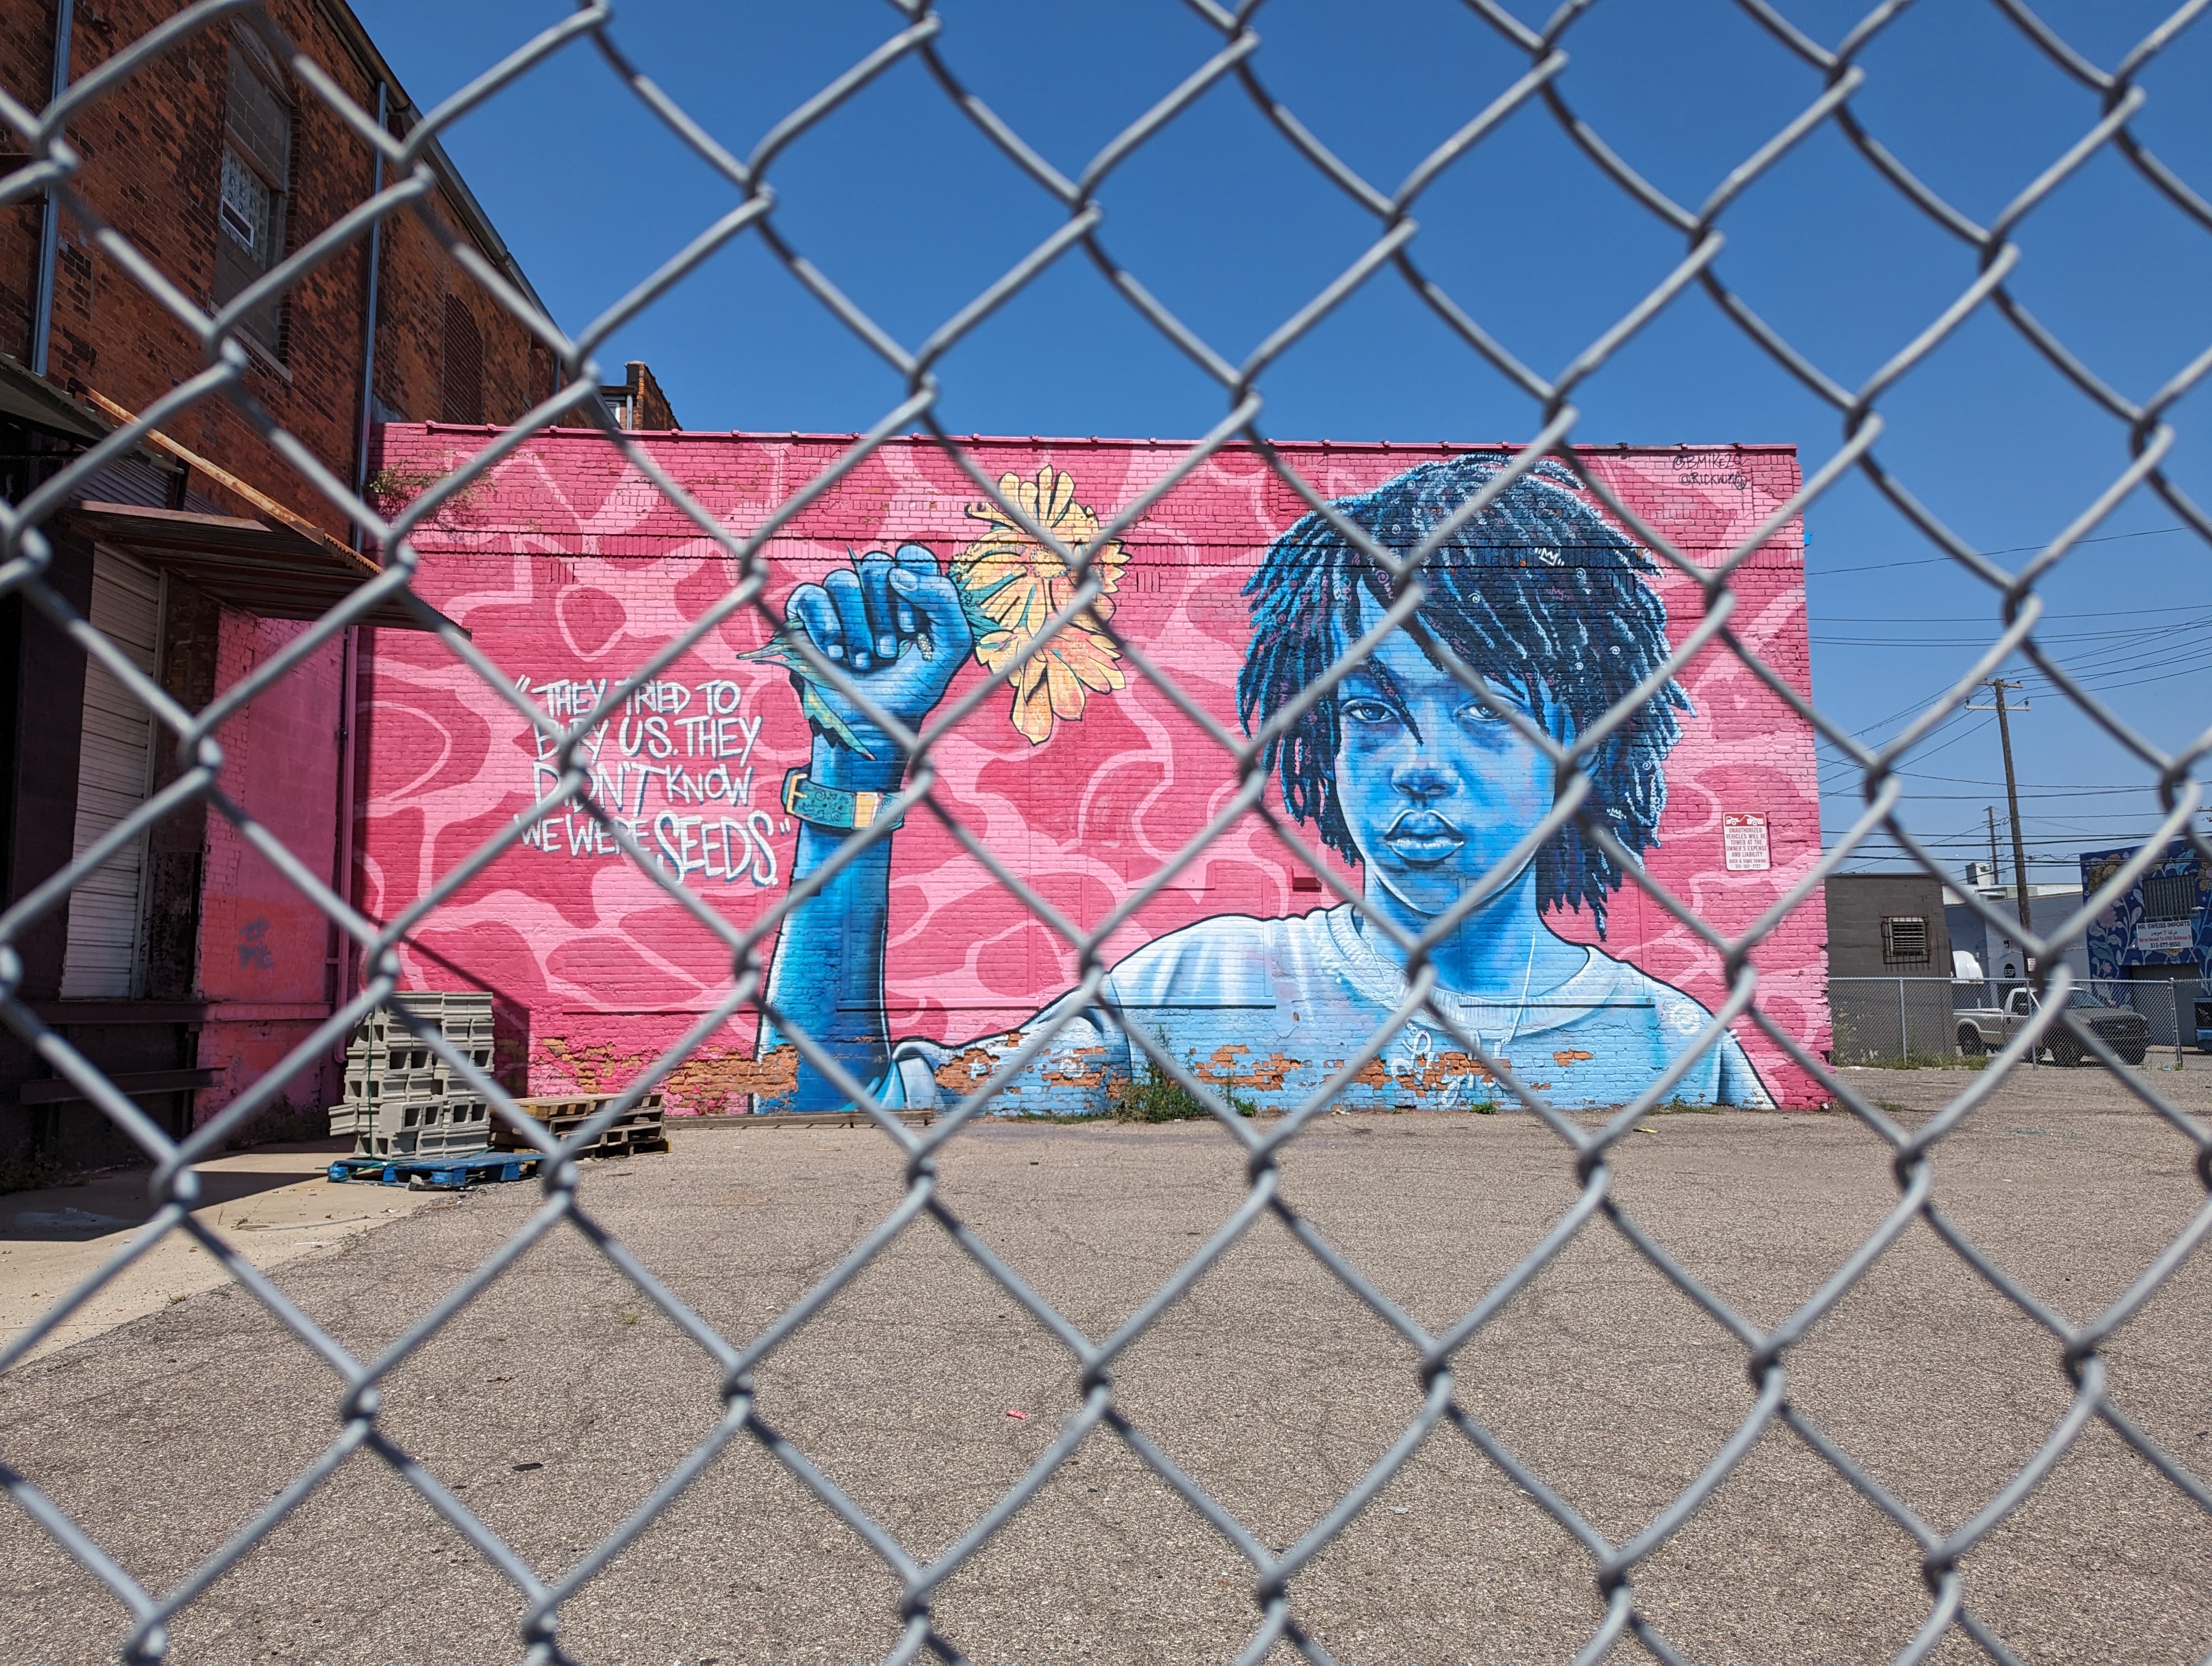 A photo of a mural, viewed through a chain link fence. The mural depicts a young Black person in shades of blue, holding a yellow flower against a pink background.